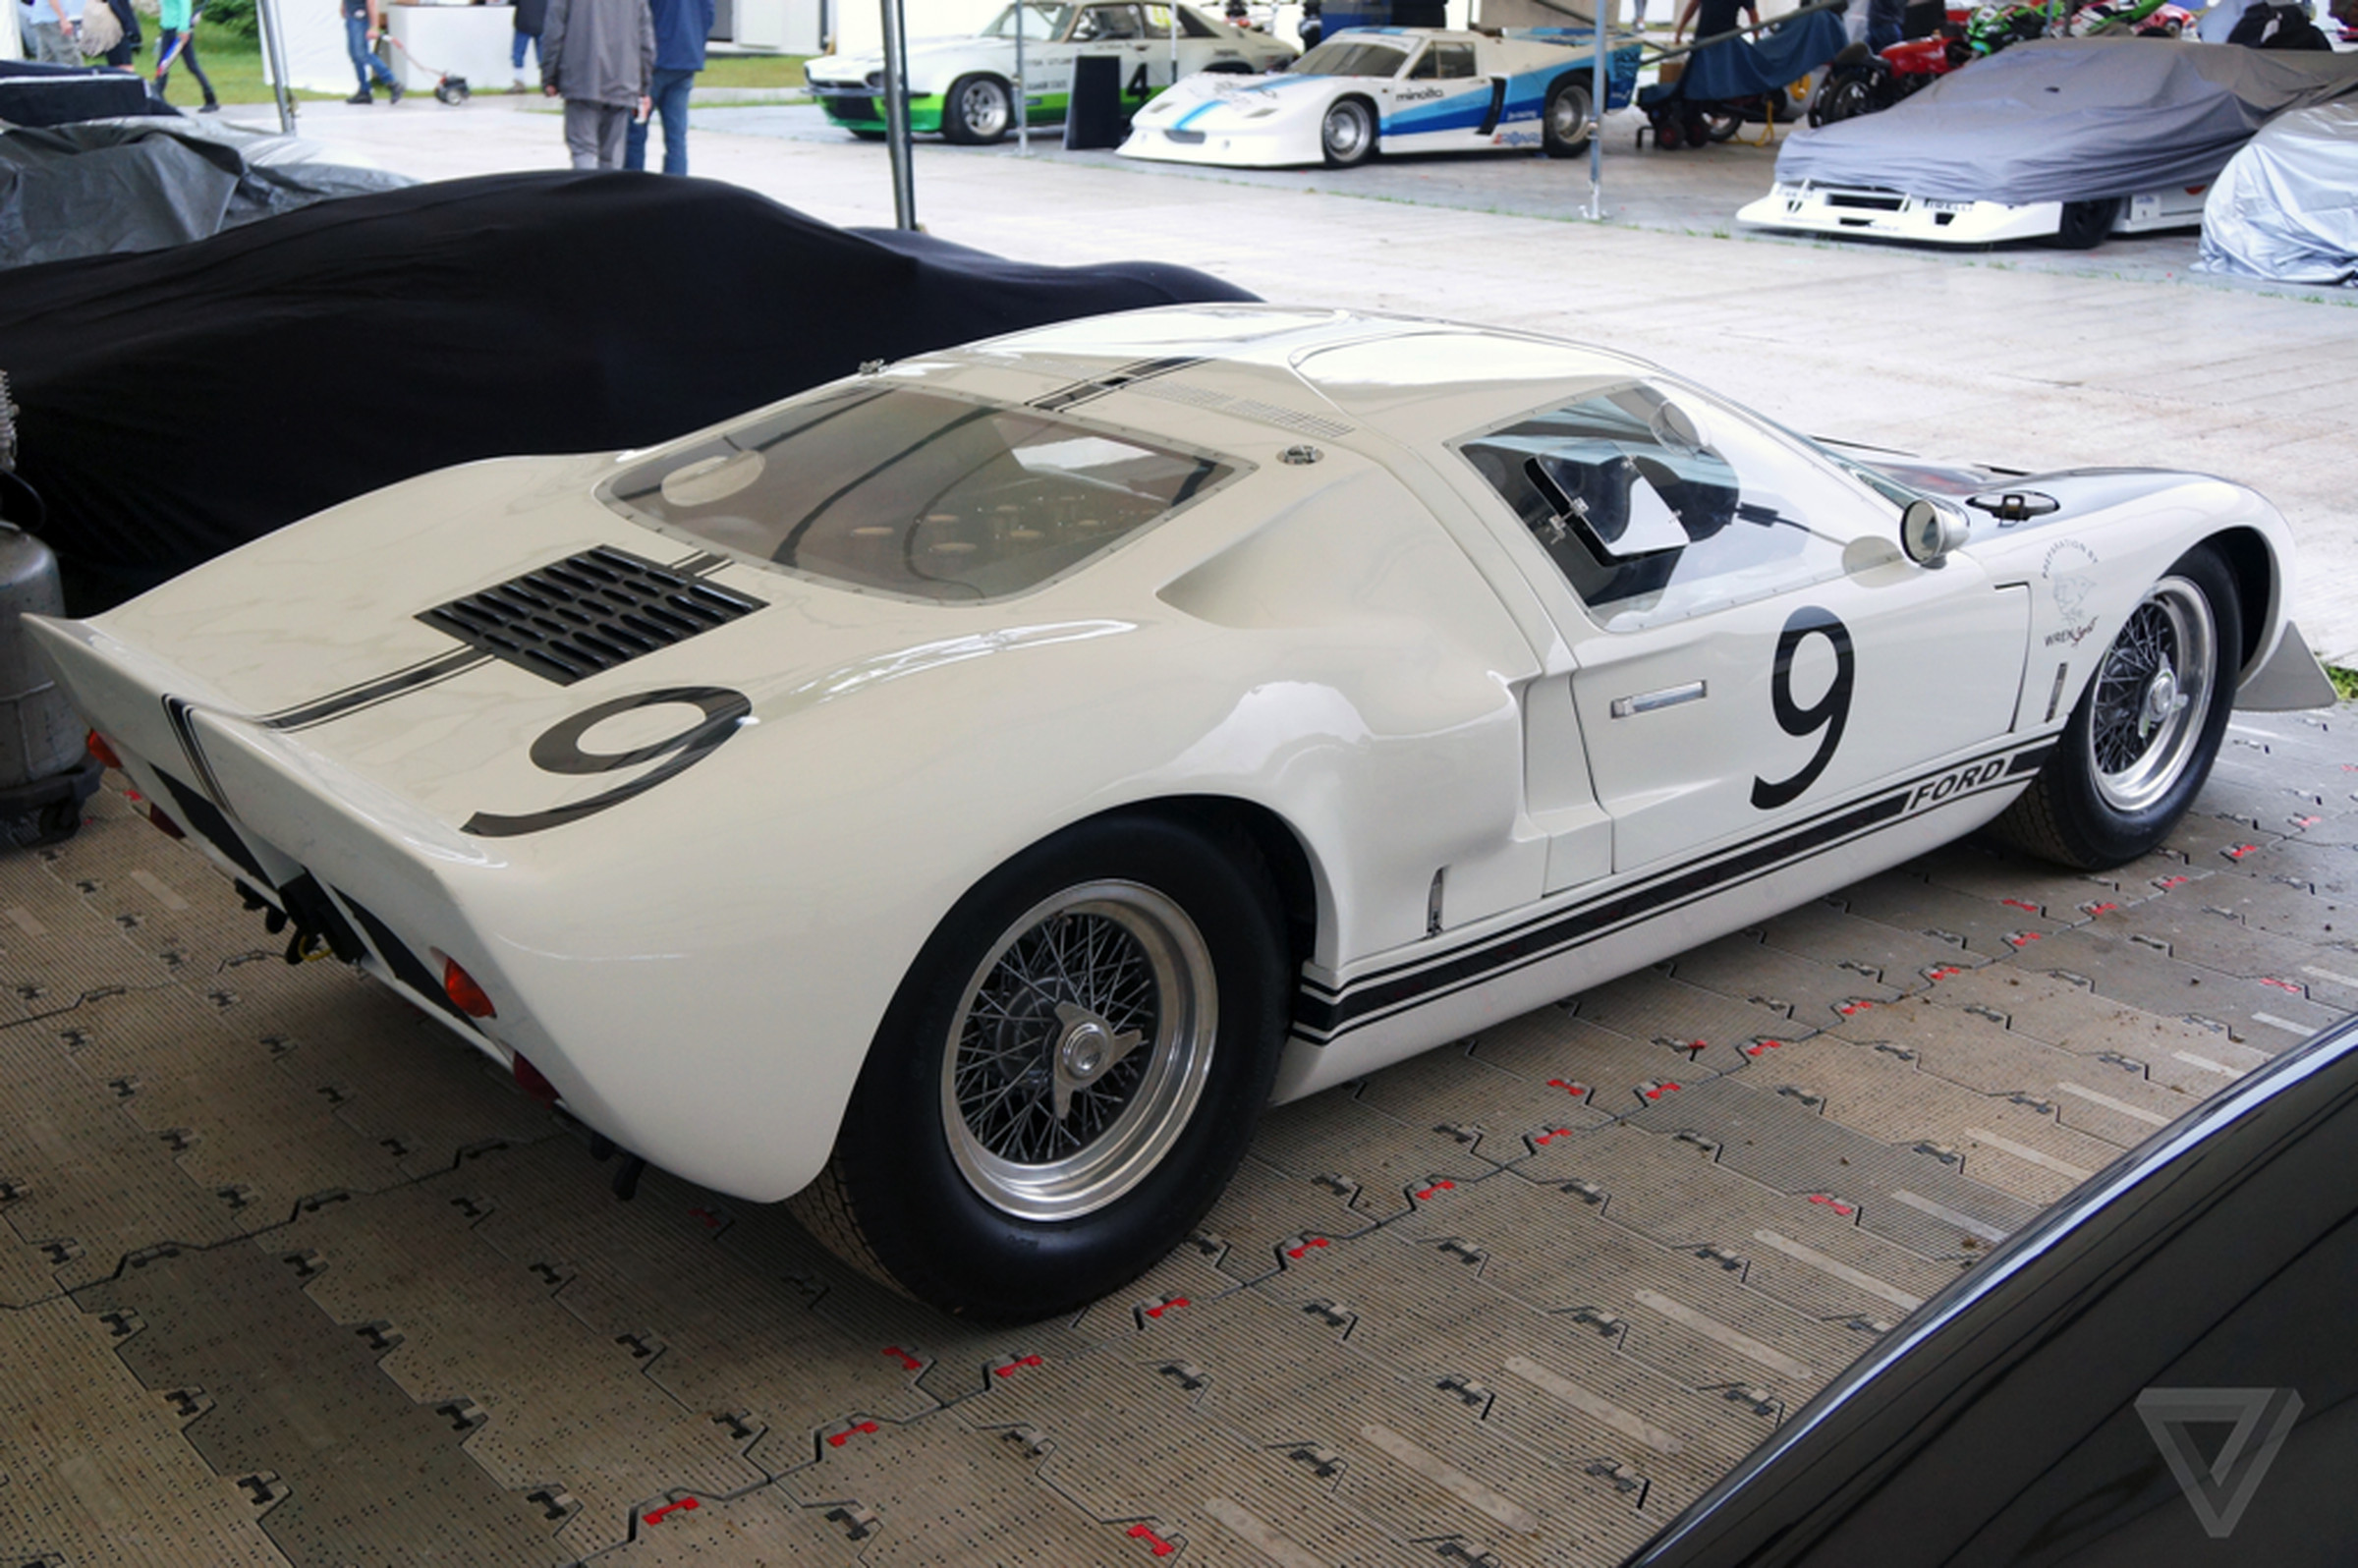 Goodwood Festival of Speed 2016 classic cars, part 1